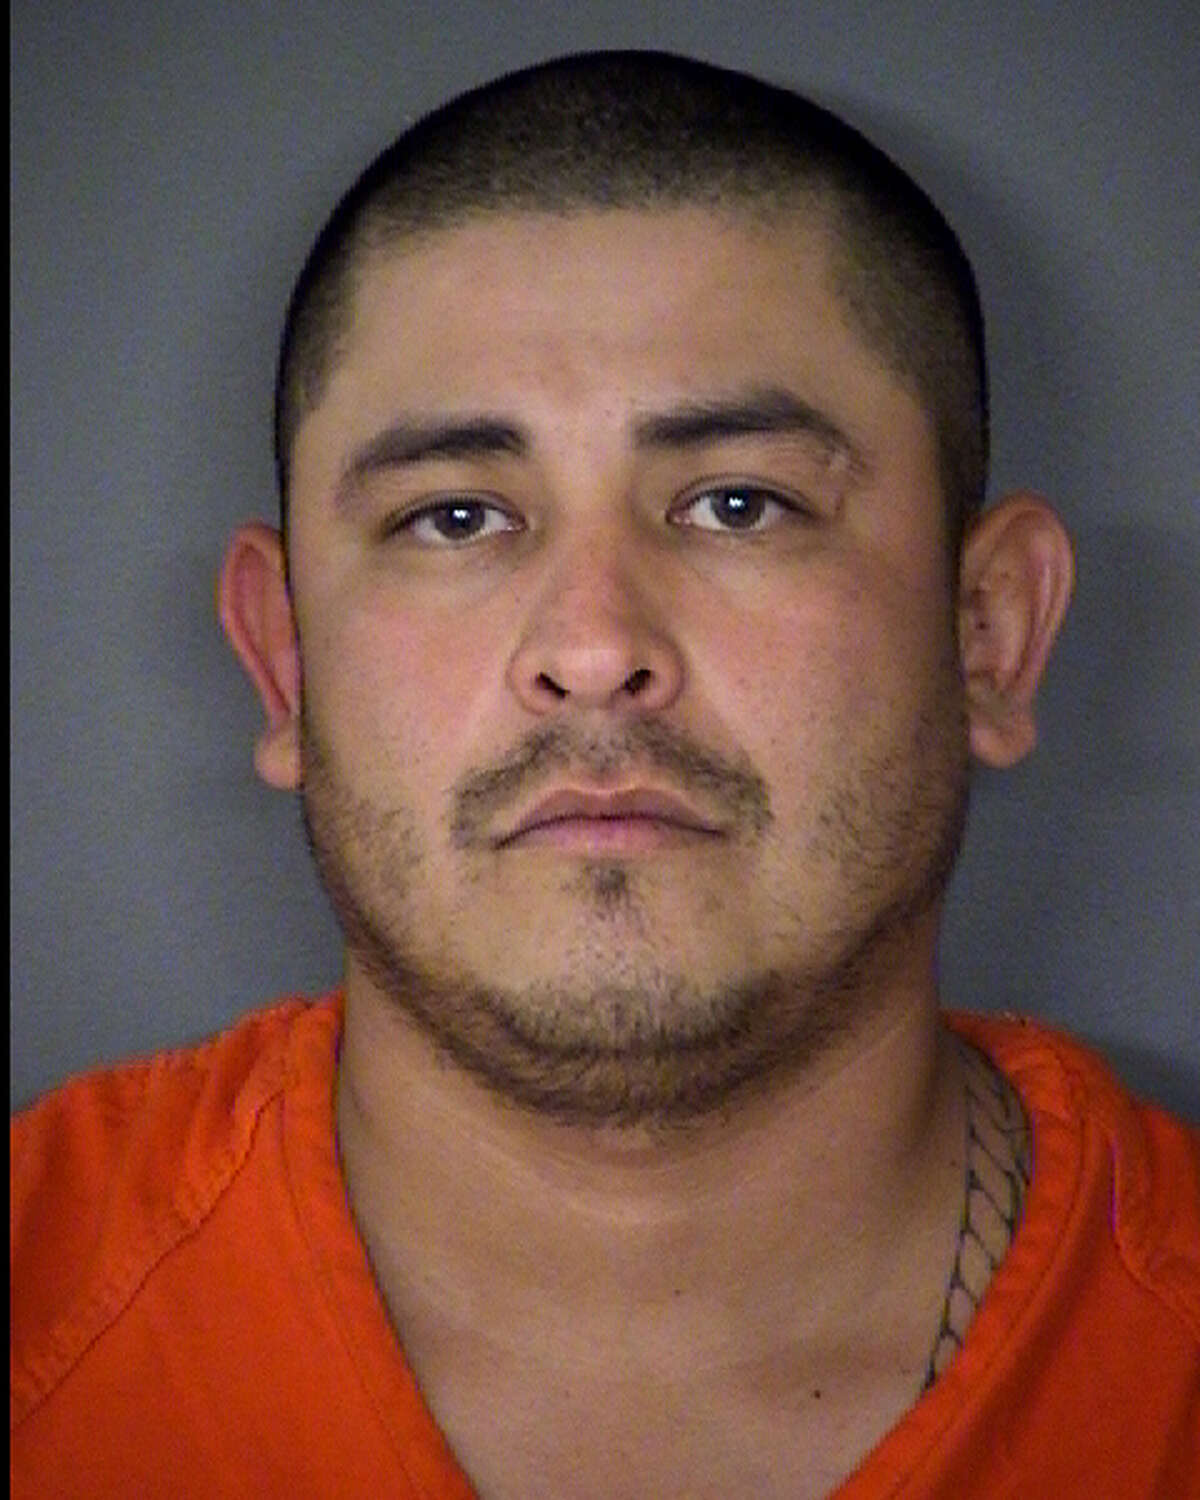 David Rojas, 31, was arrested Aug. 19, 2016, on a third-degree felony charge of retaliation.